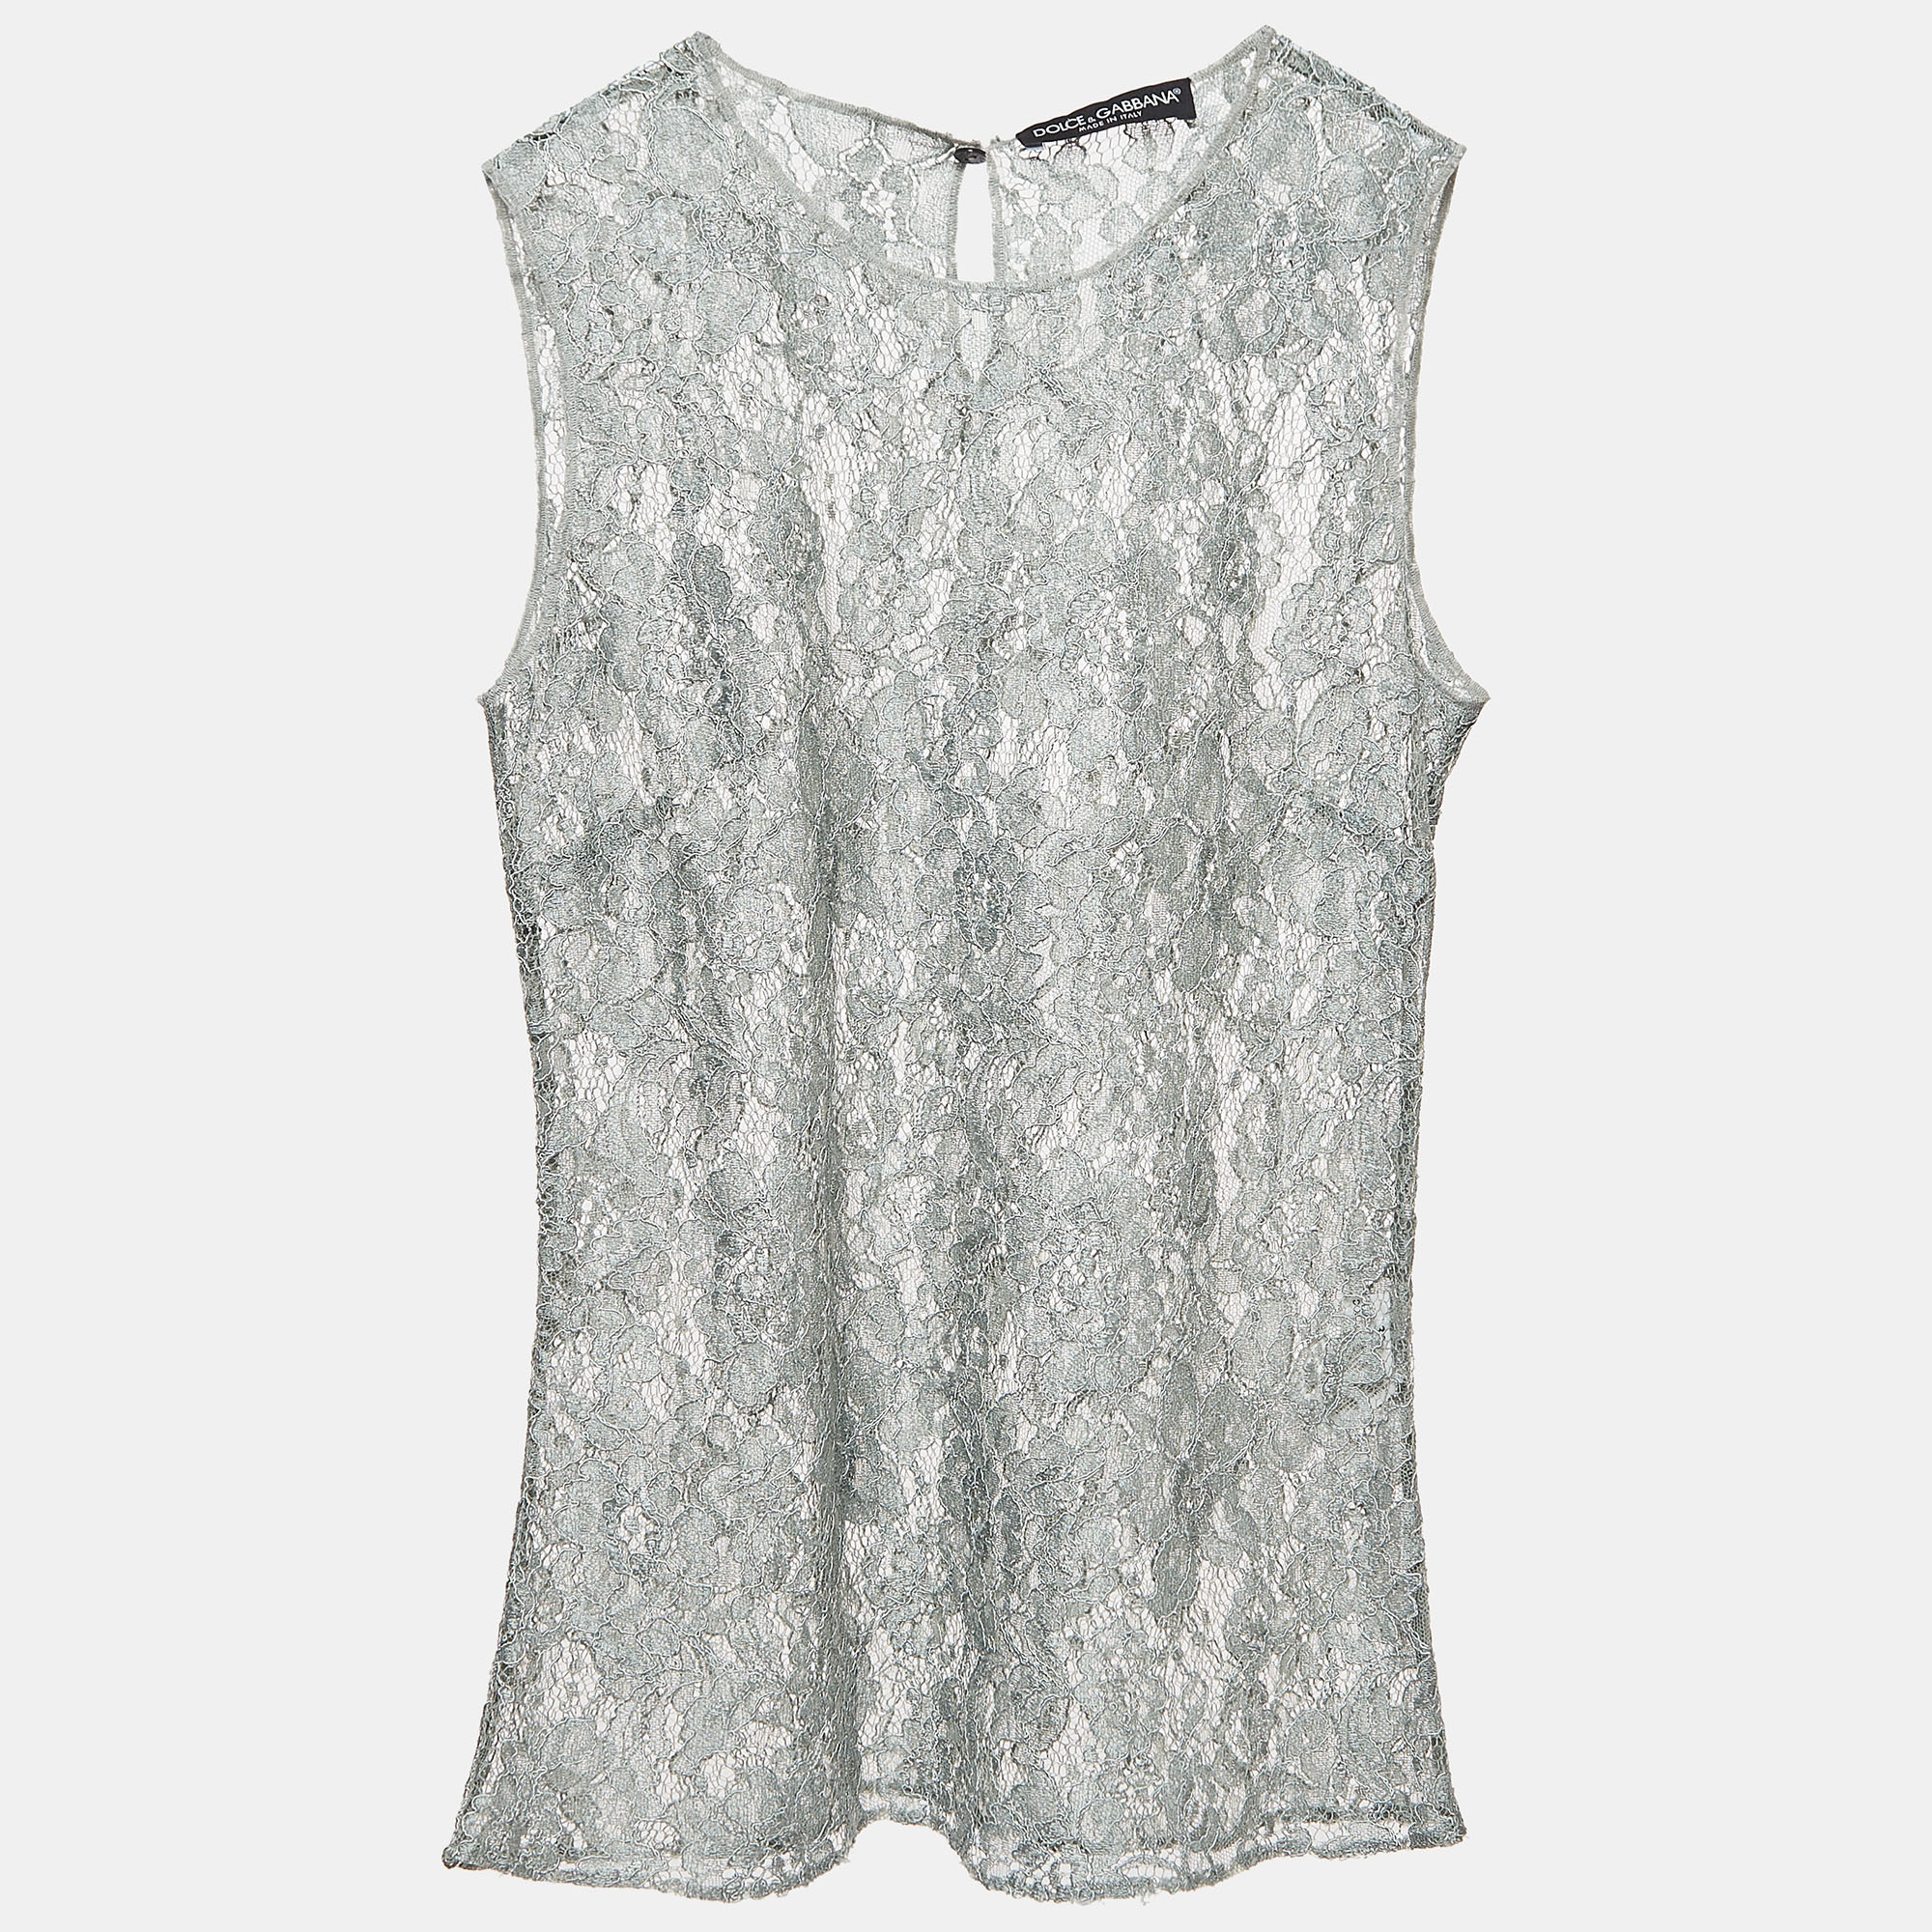 Dolce & gabbana sage green floral lace sleeveless blouse s